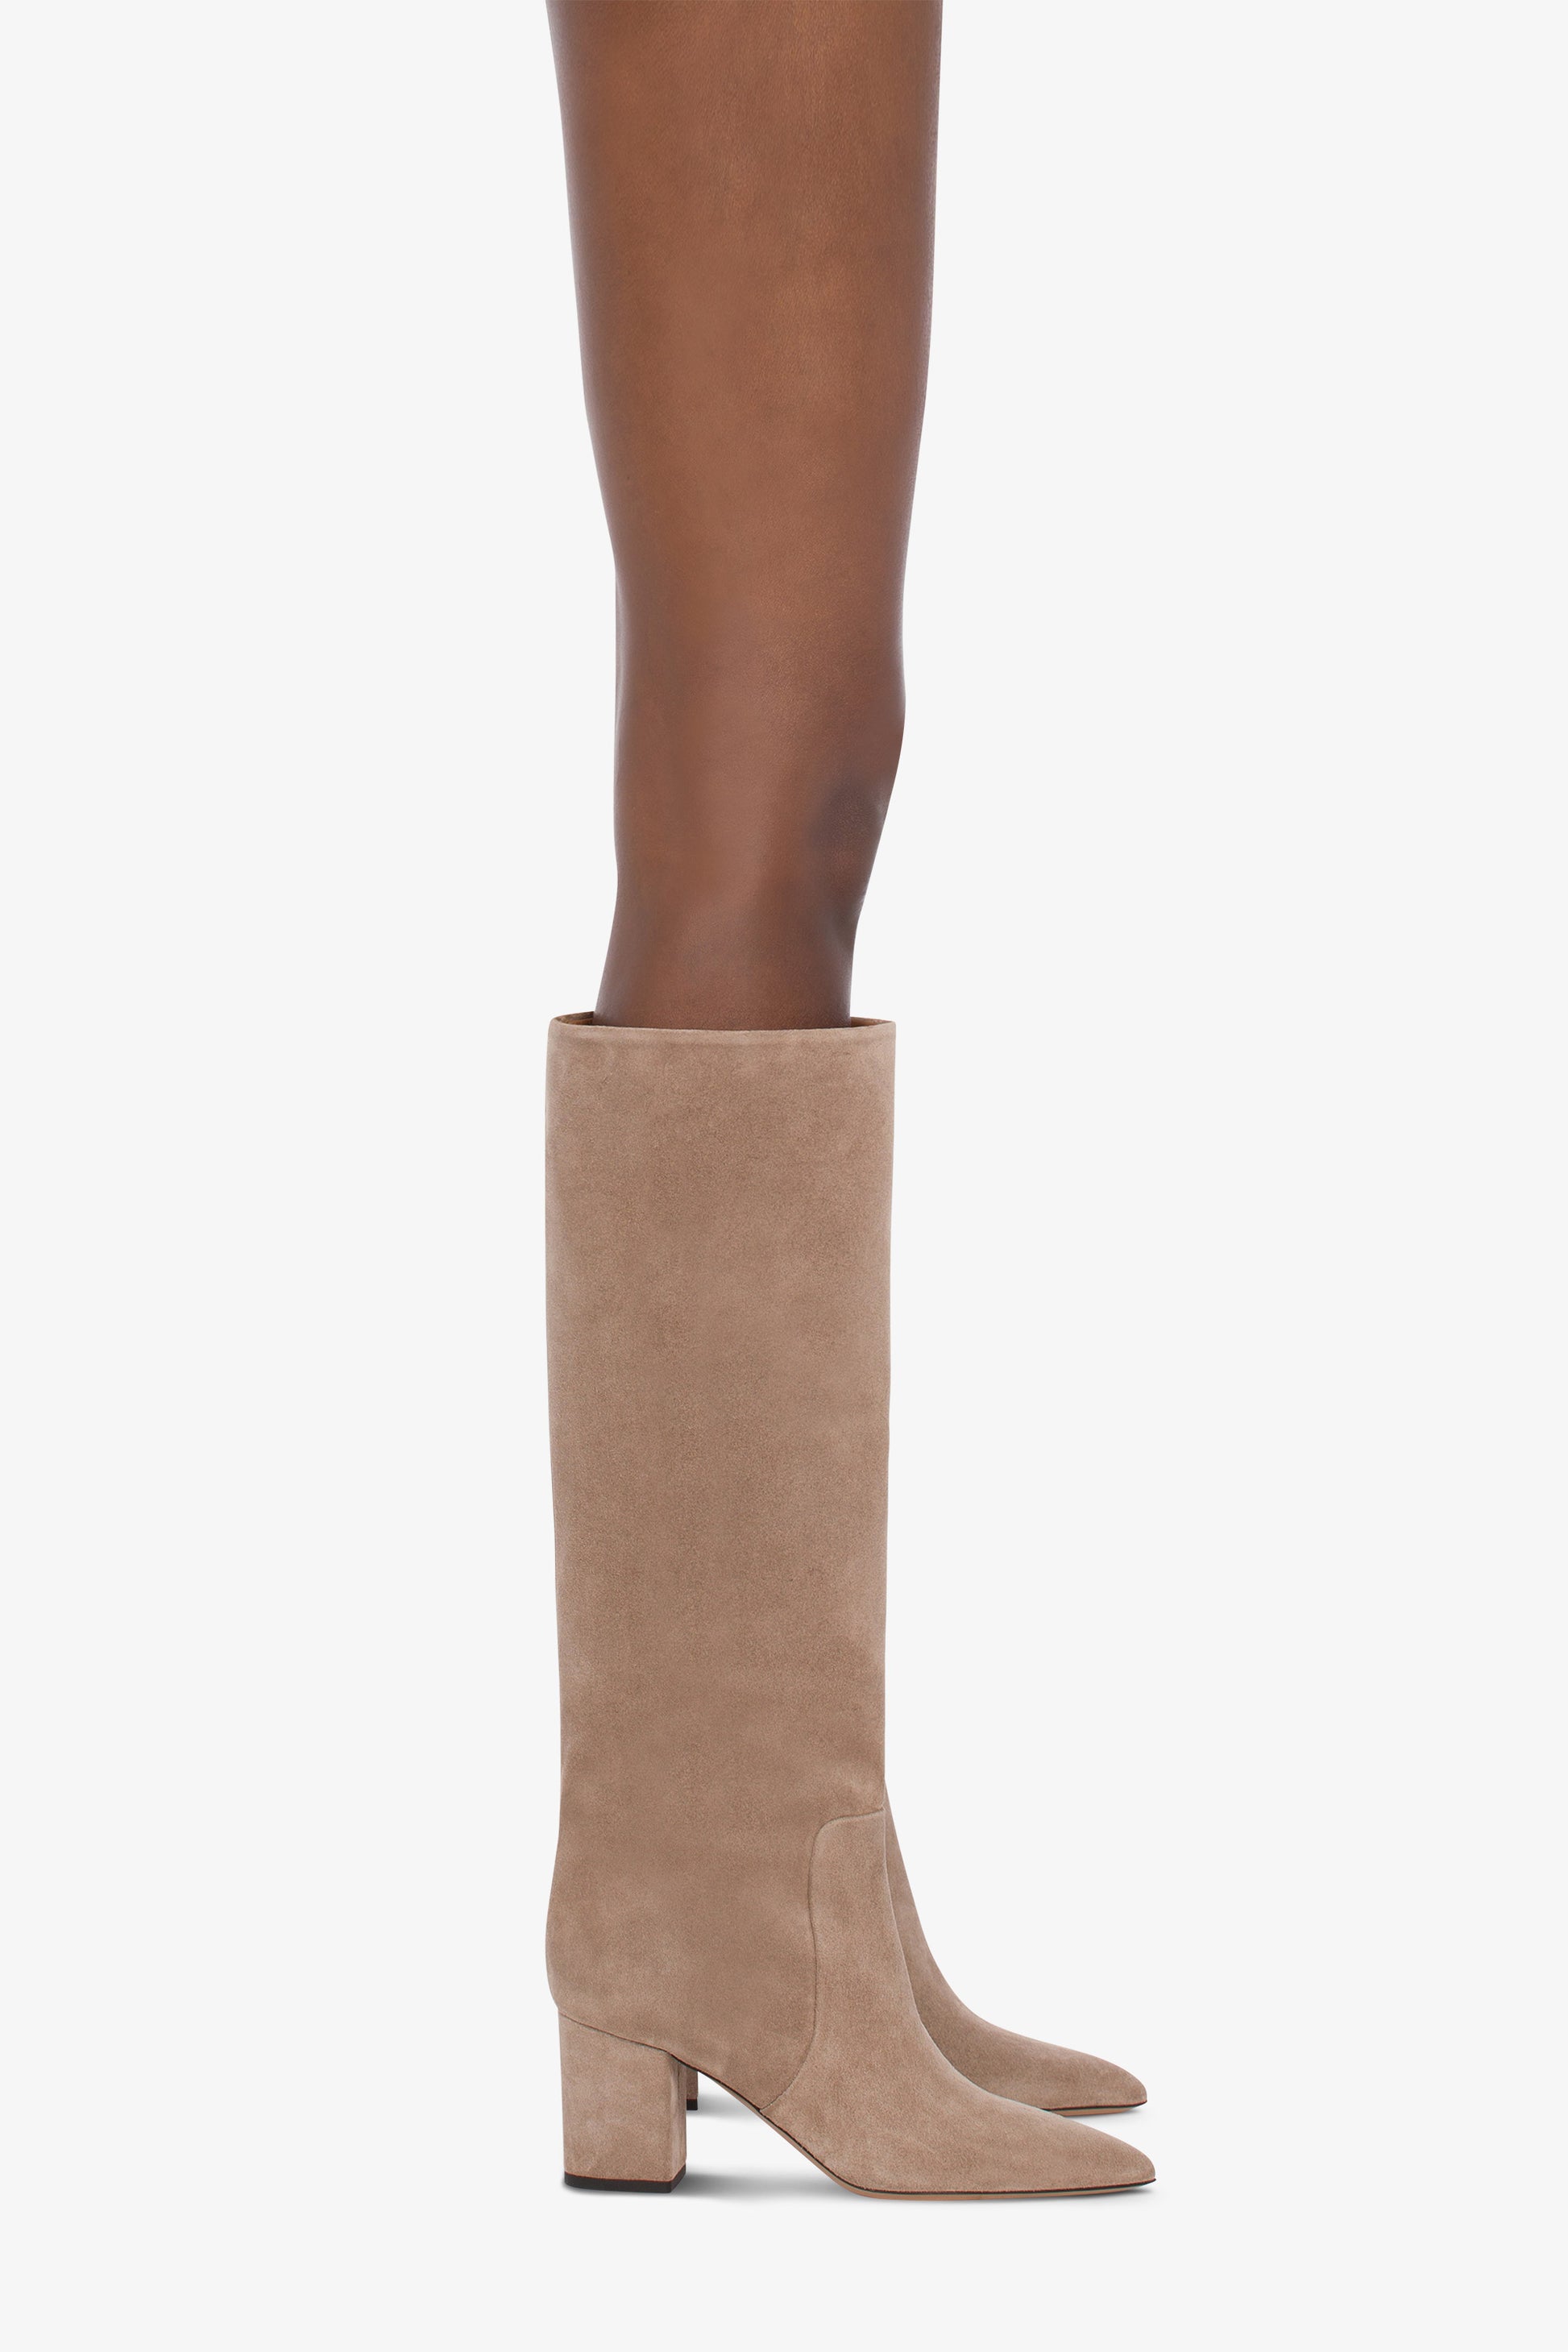 Knee-high boots in soft koala suede leather - Indossato